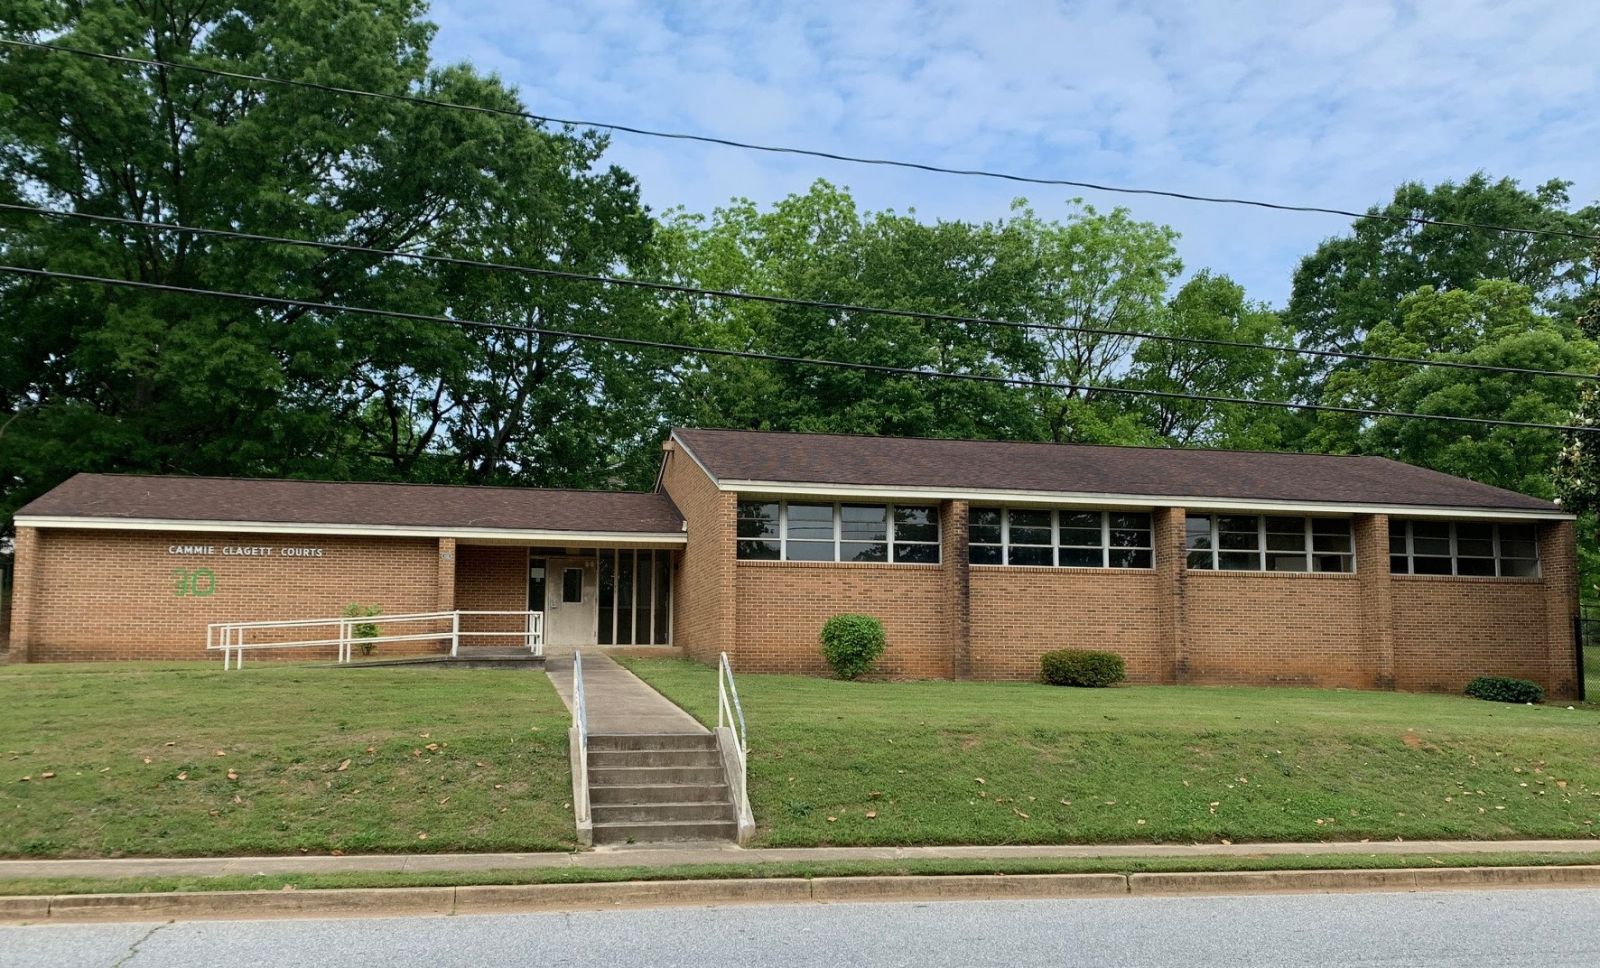 Spartanburg Highland Community Partnership's $300,000 grant will be used to transform a former public housing facility into an early education center. (Photo/Provided)